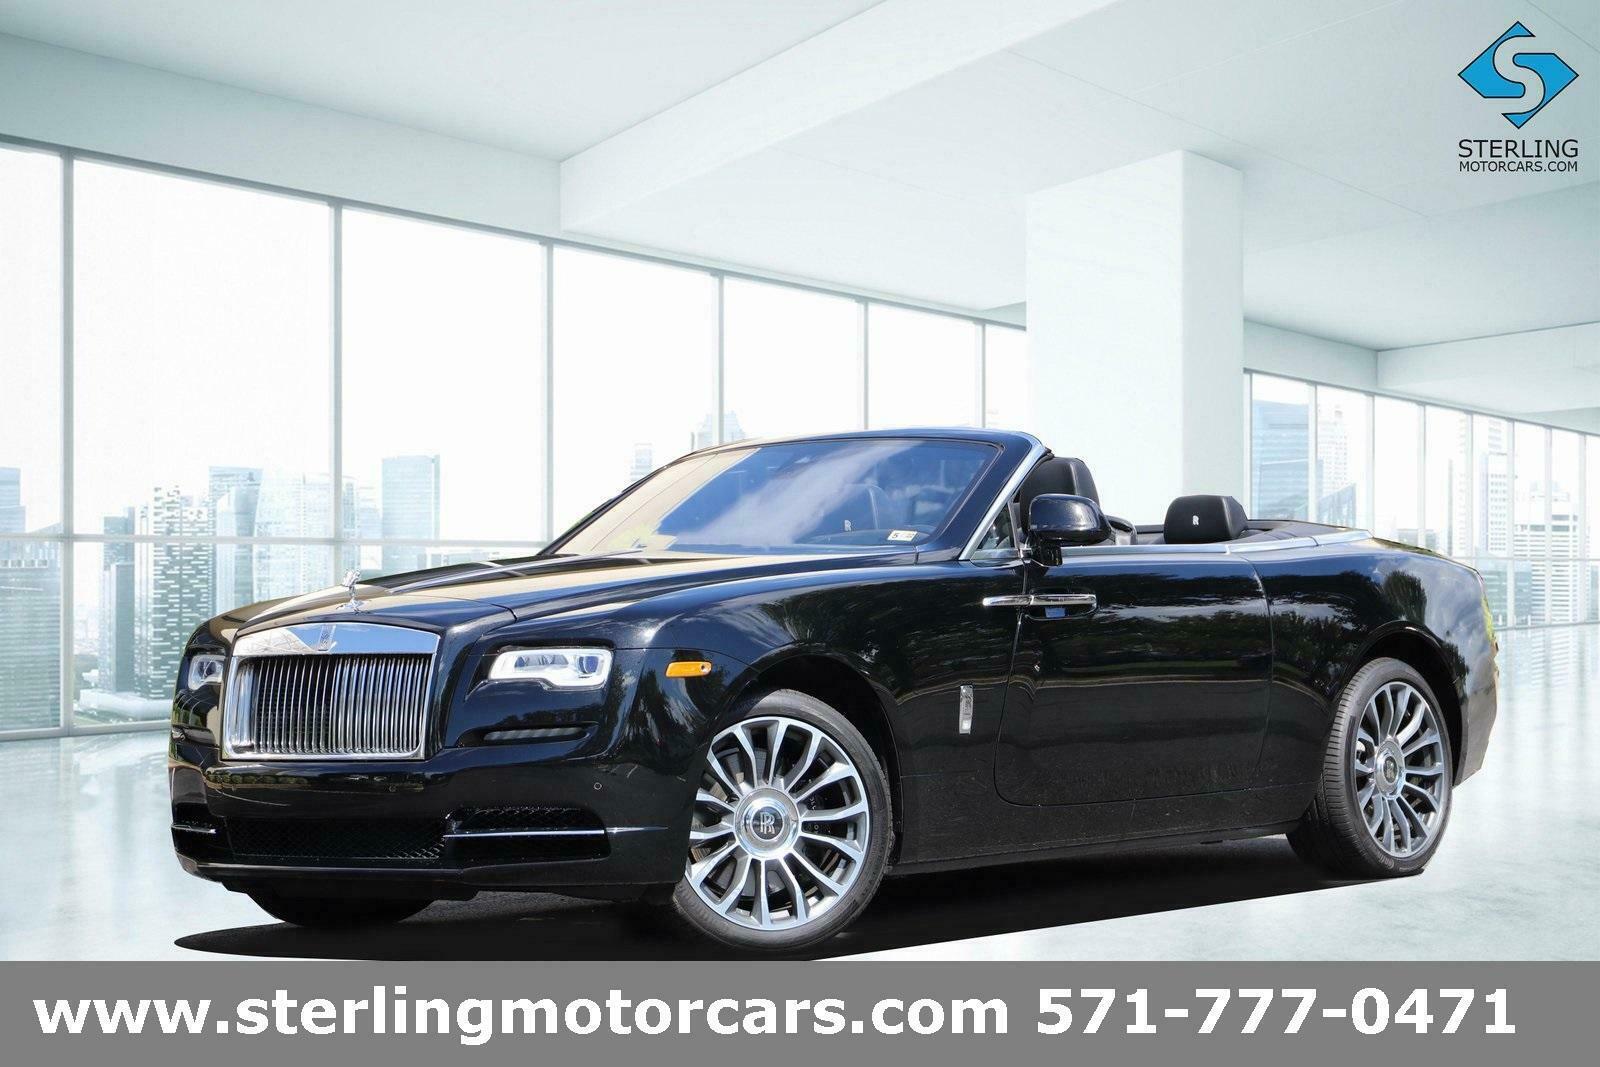 2018 Rolls-royce Dawn Convertible 2018 Rolls-royce Dawn,  With 15321 Miles Available Now!